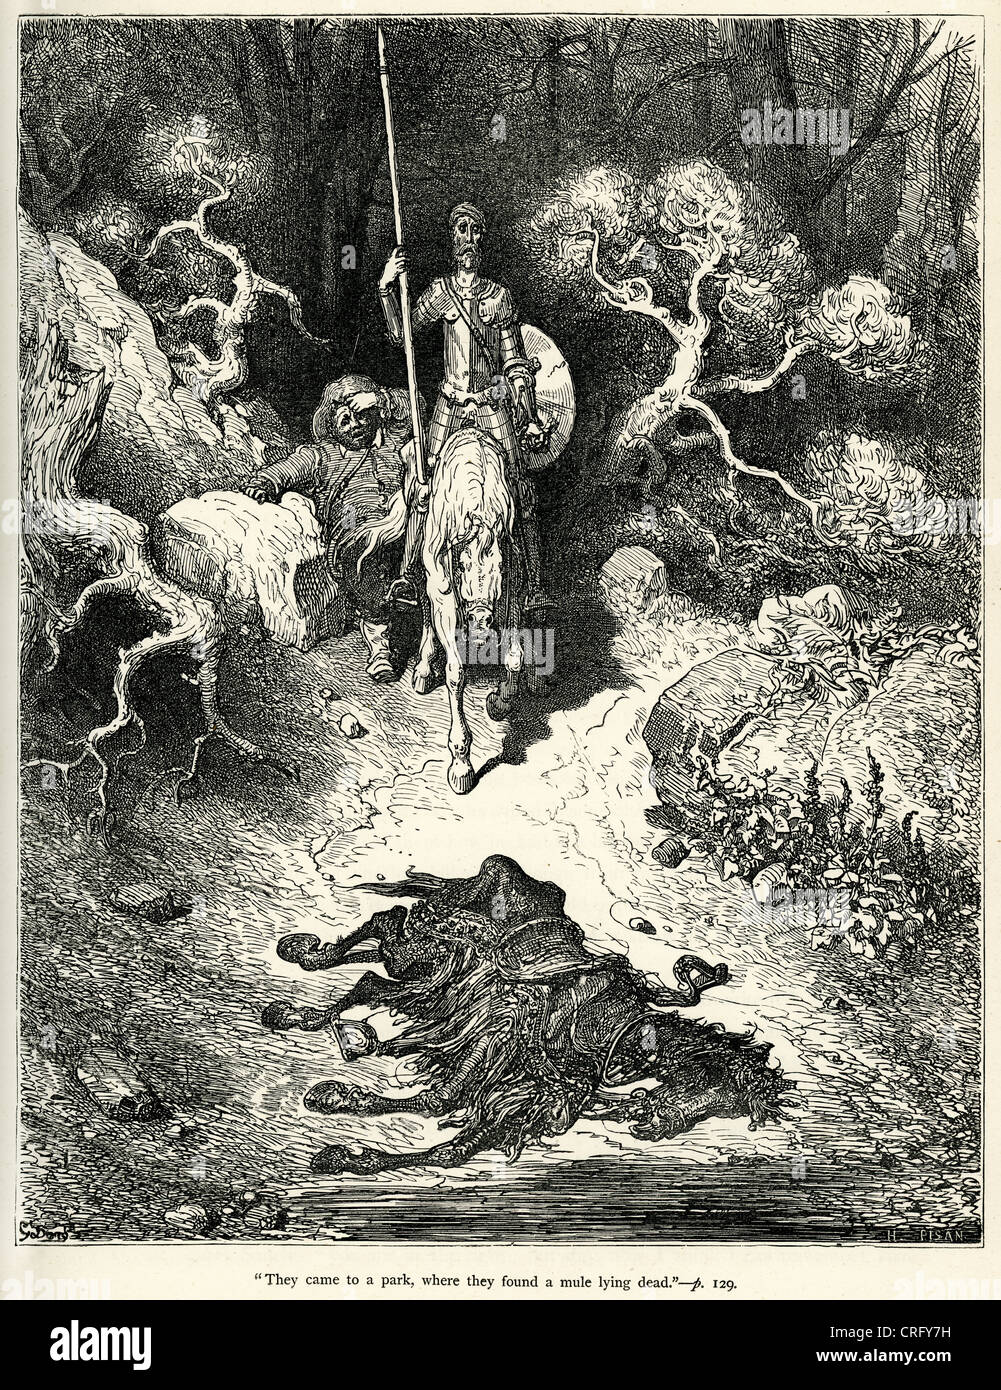 Don Quixote and Sancho Panza find a dead mule. Illustration by Gustave ...